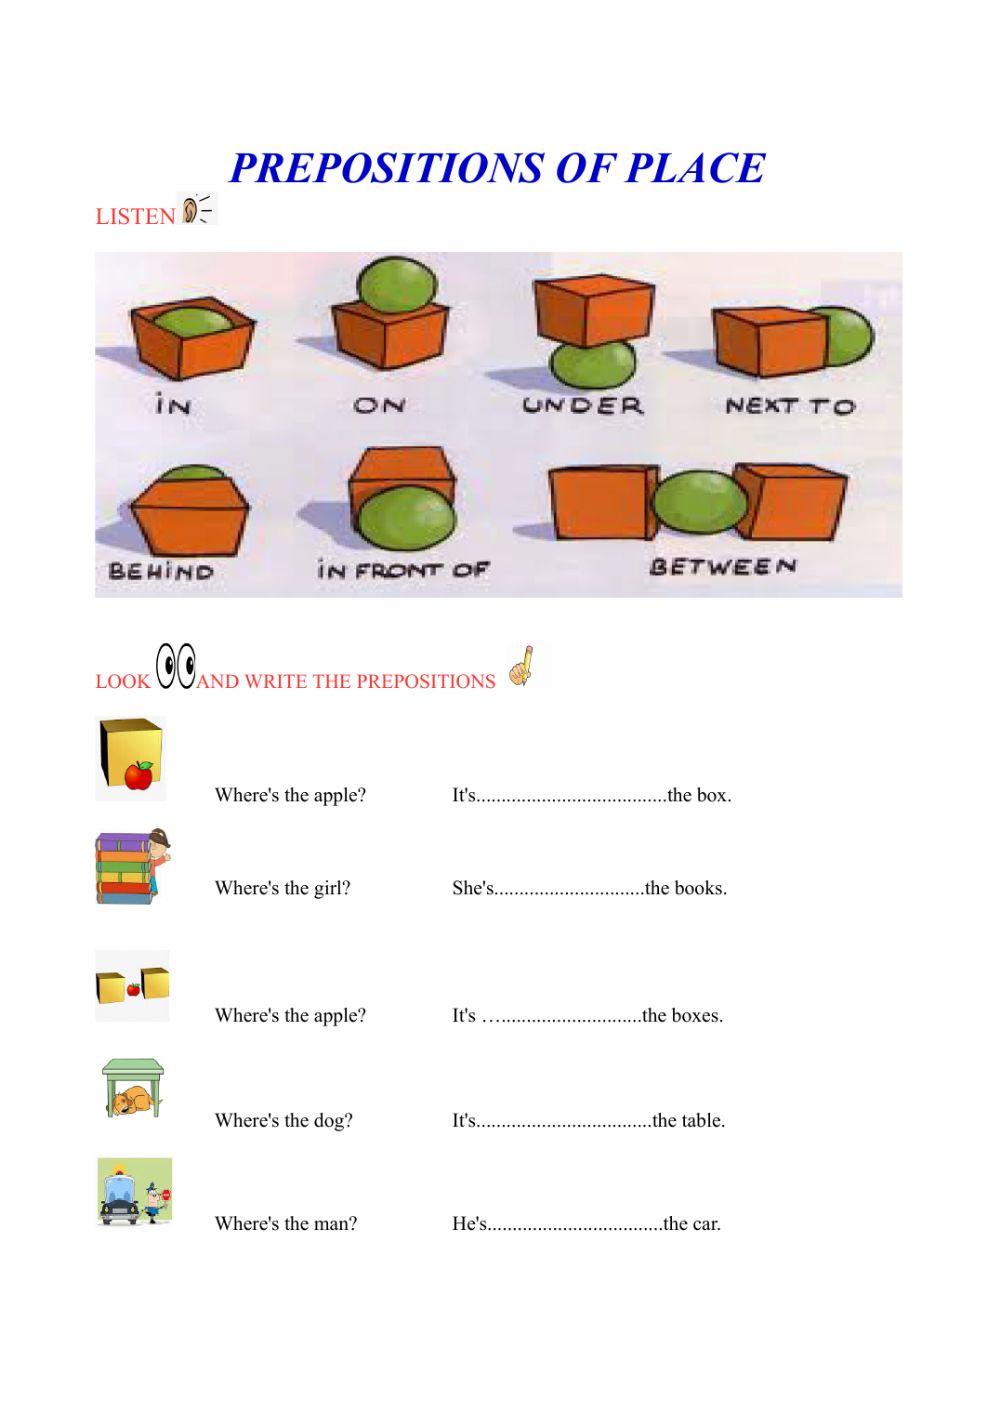 Prepositions of place online exercise for Grades 3 and 4